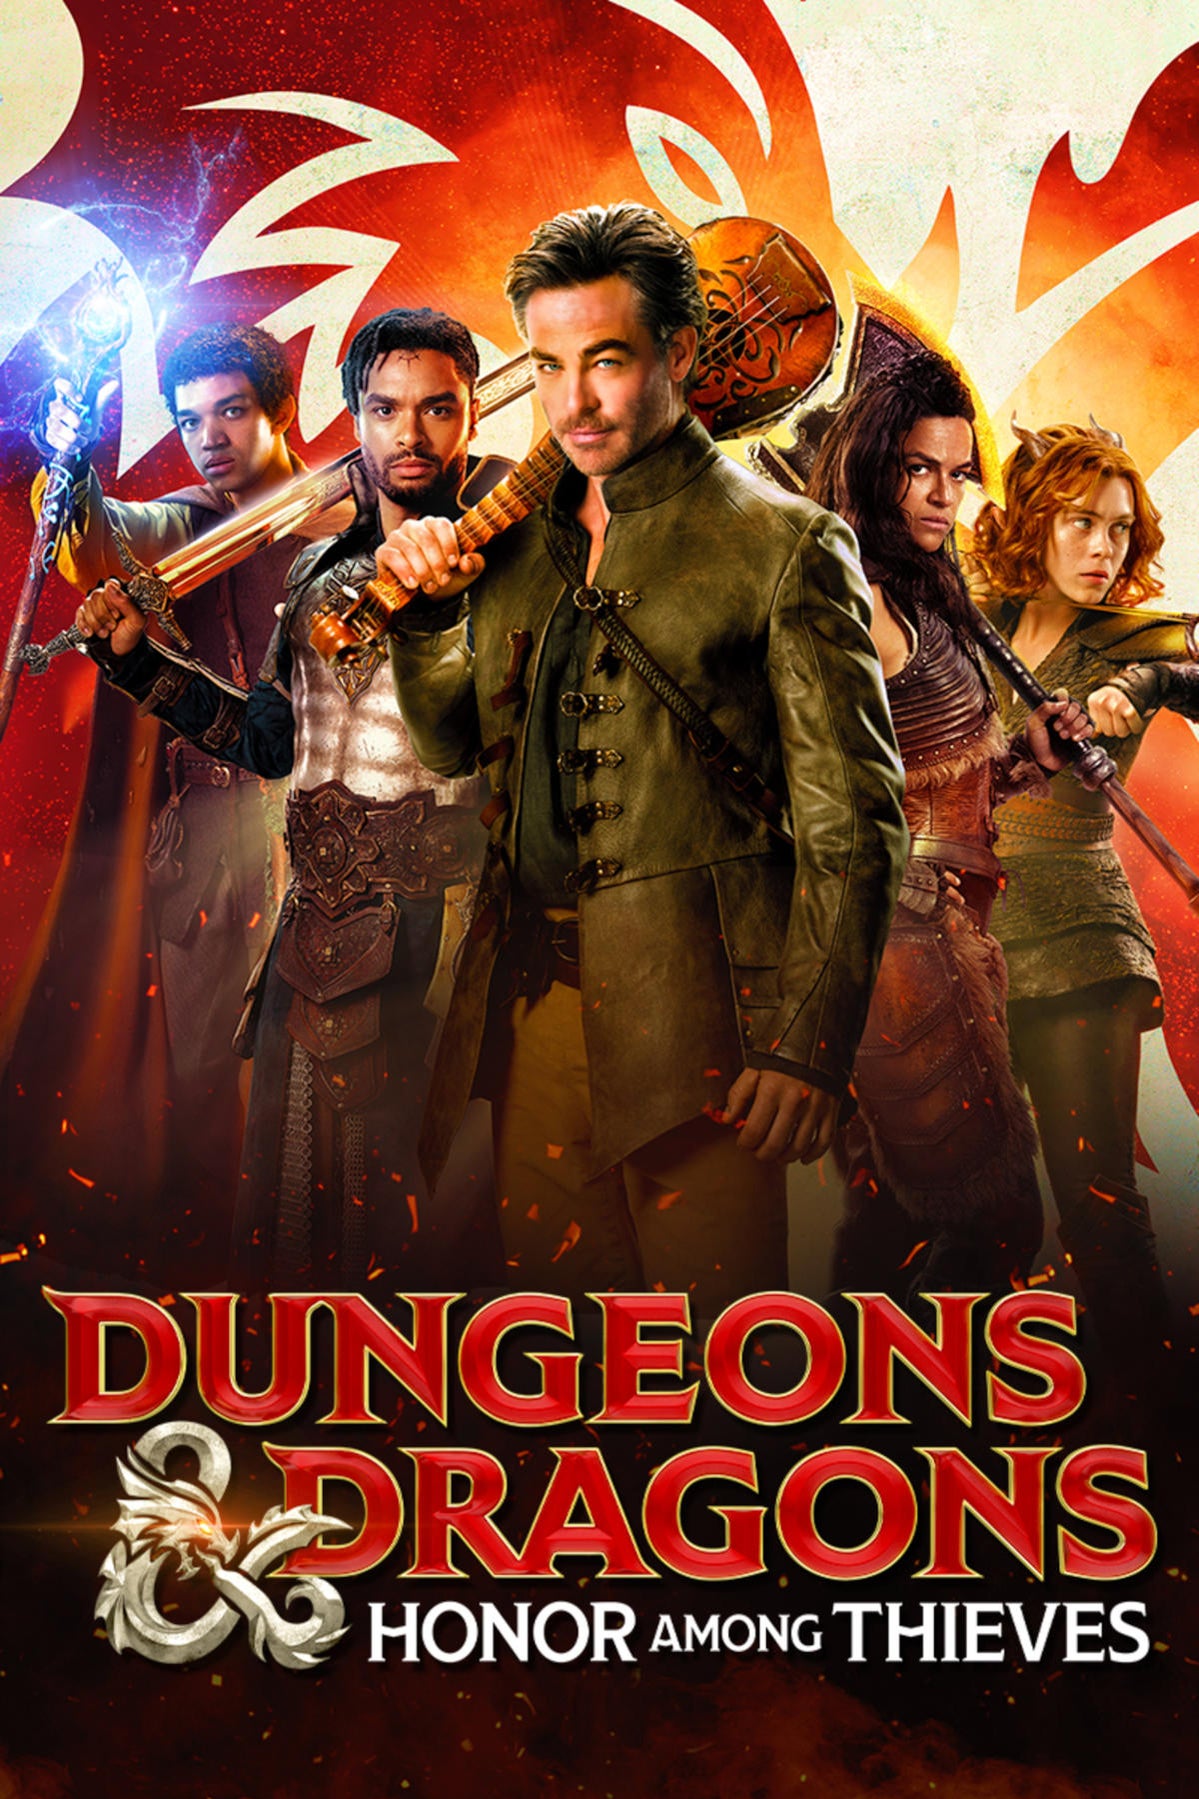 dungeons-and-dragons-honor-among-thieves-dvd-blu-ray-cover-art.jpg